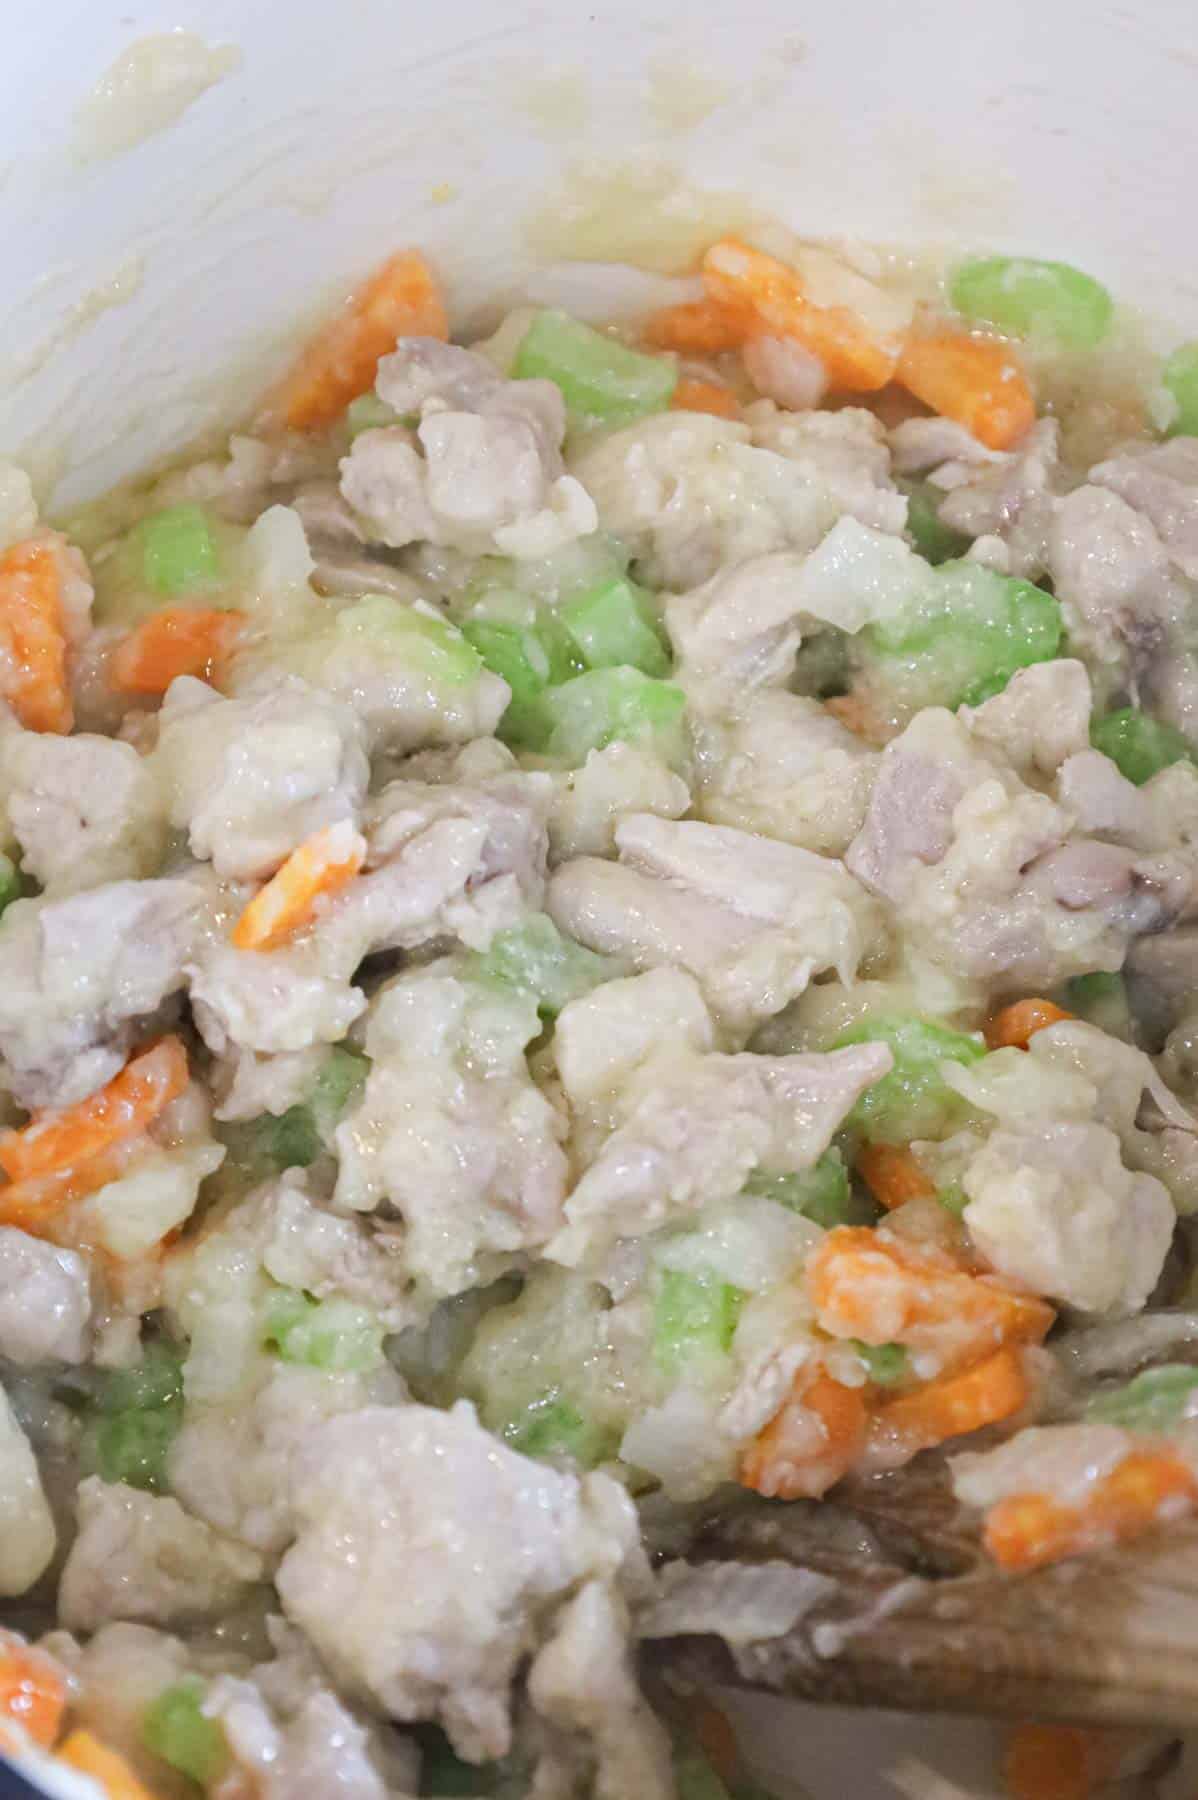 flour and butter paste coating pieces of chicken and veggies in a pot